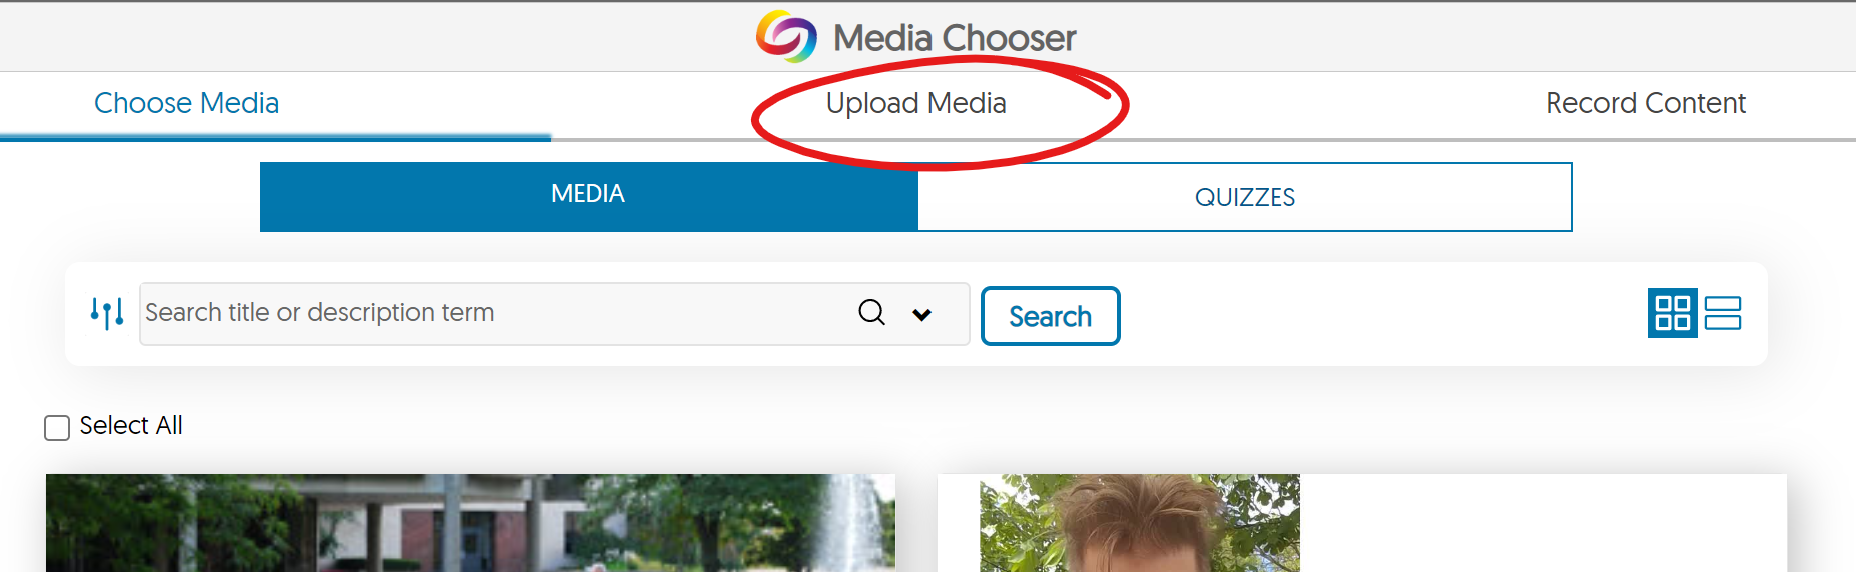 Top of Media Chooser window with Upload Media selection highlighted